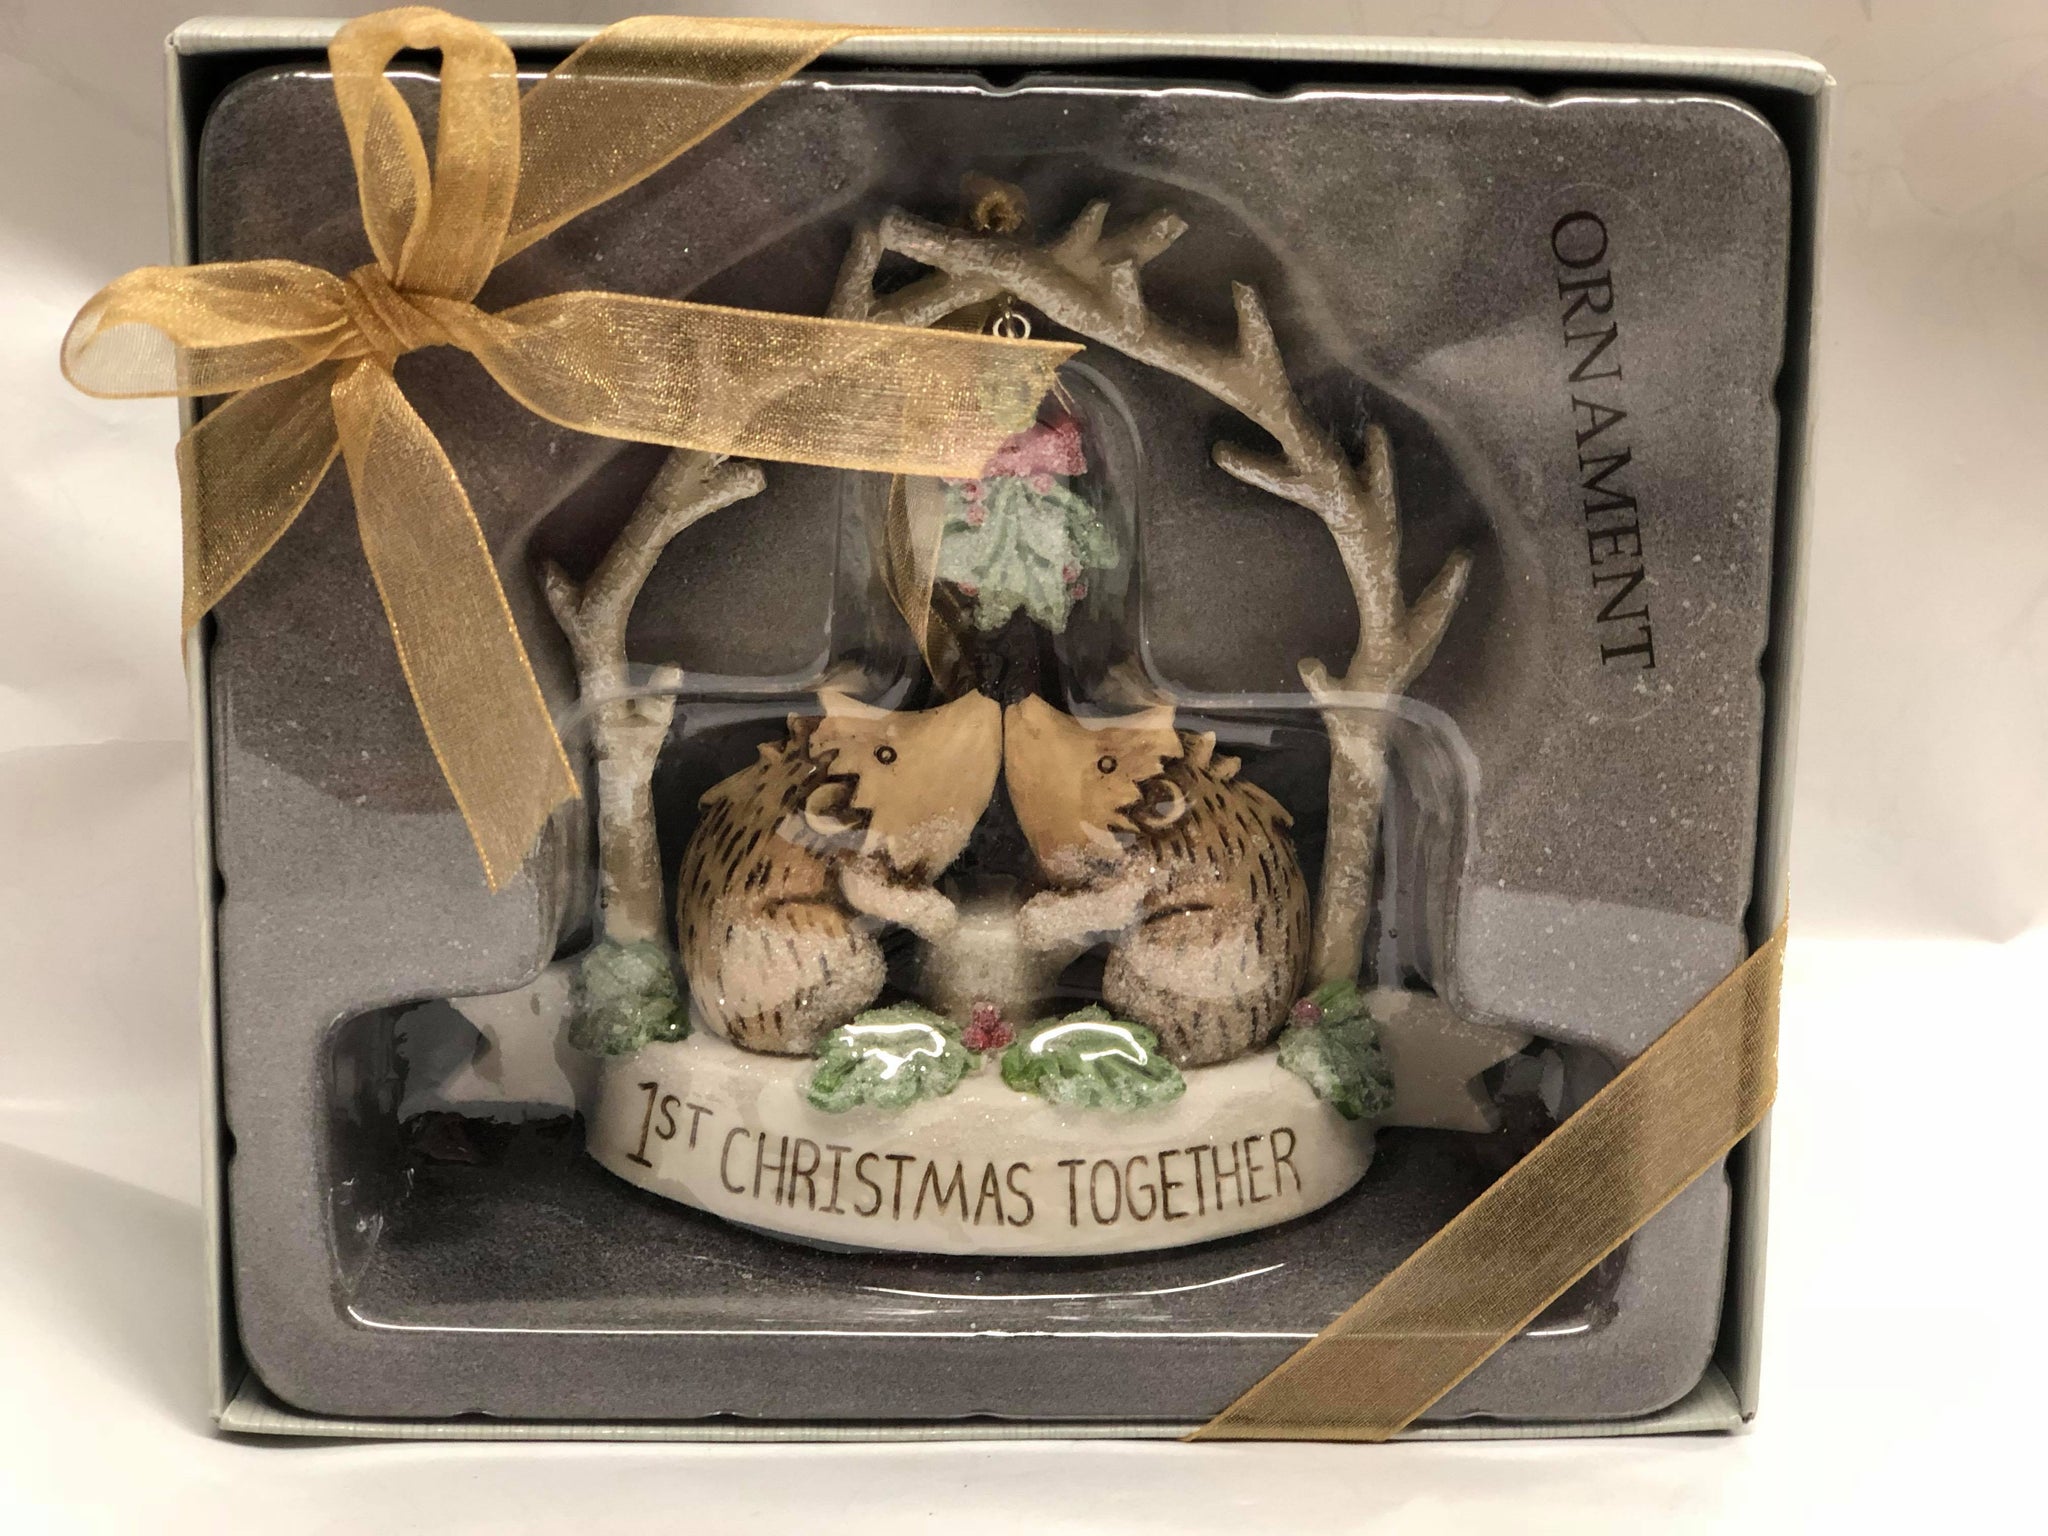 "First Christmas Together" Ornament